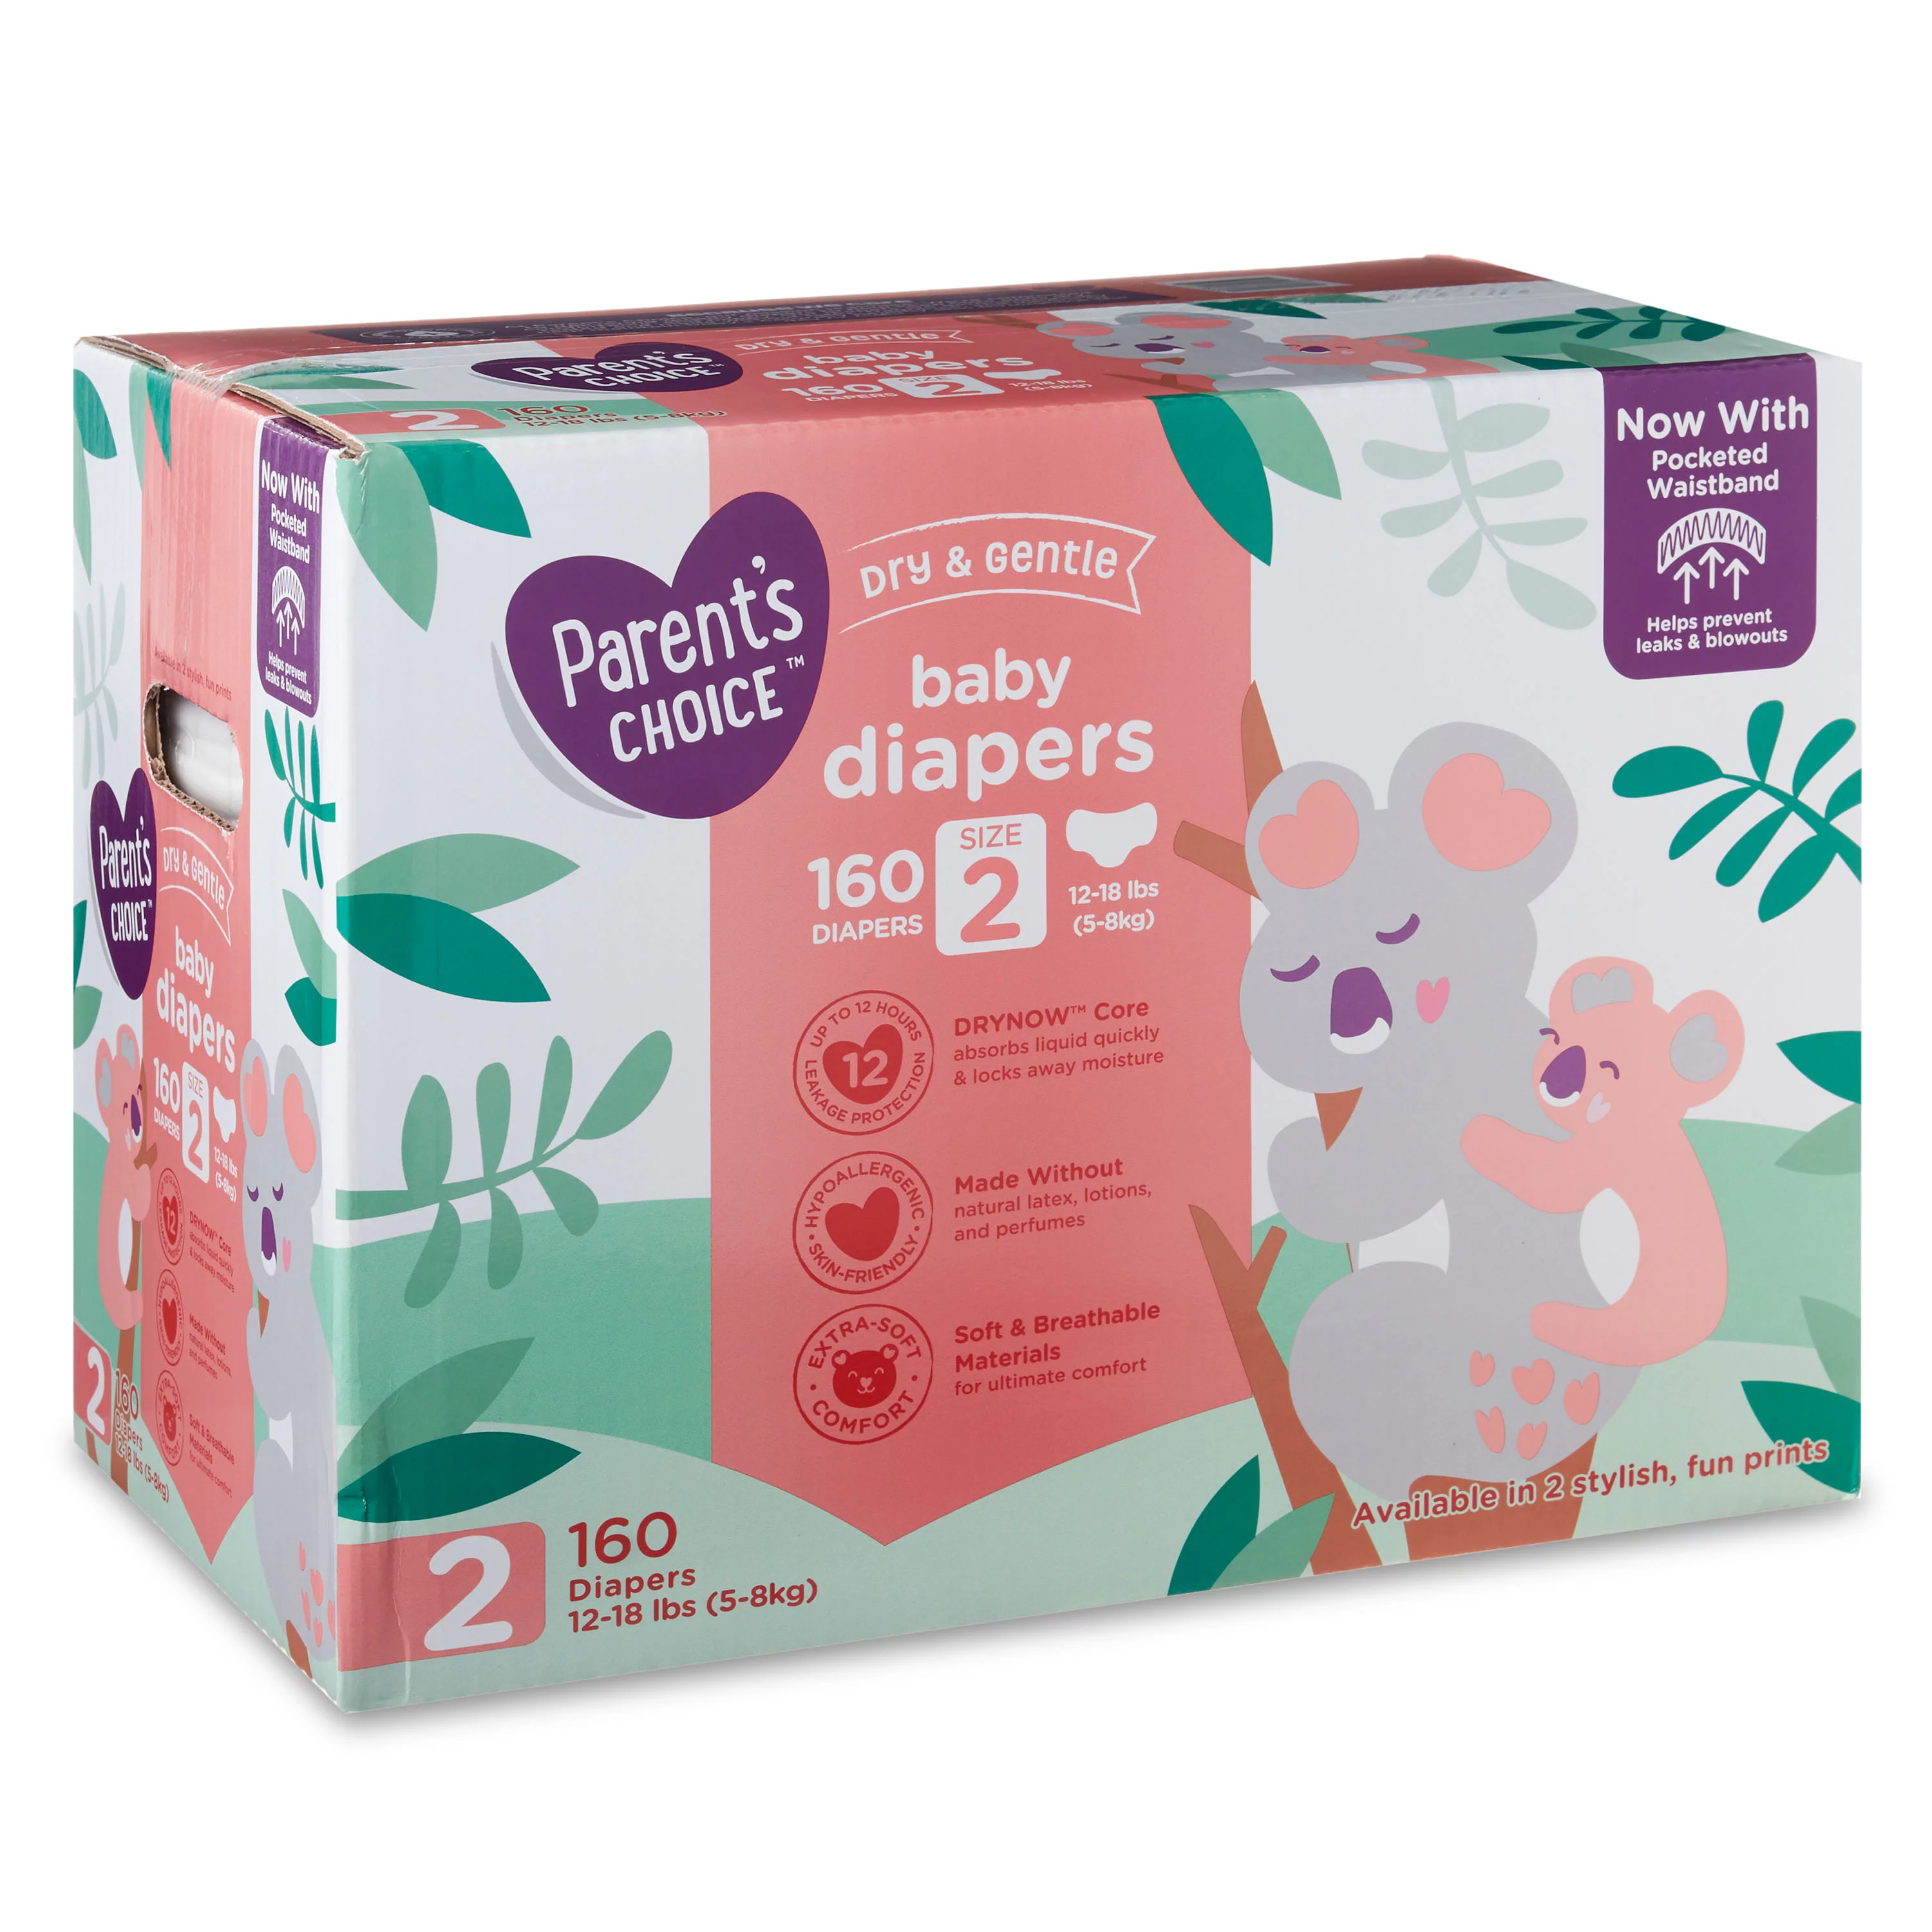  Parent's Choice Diapers, Dry & Gentle Diapers Size 2